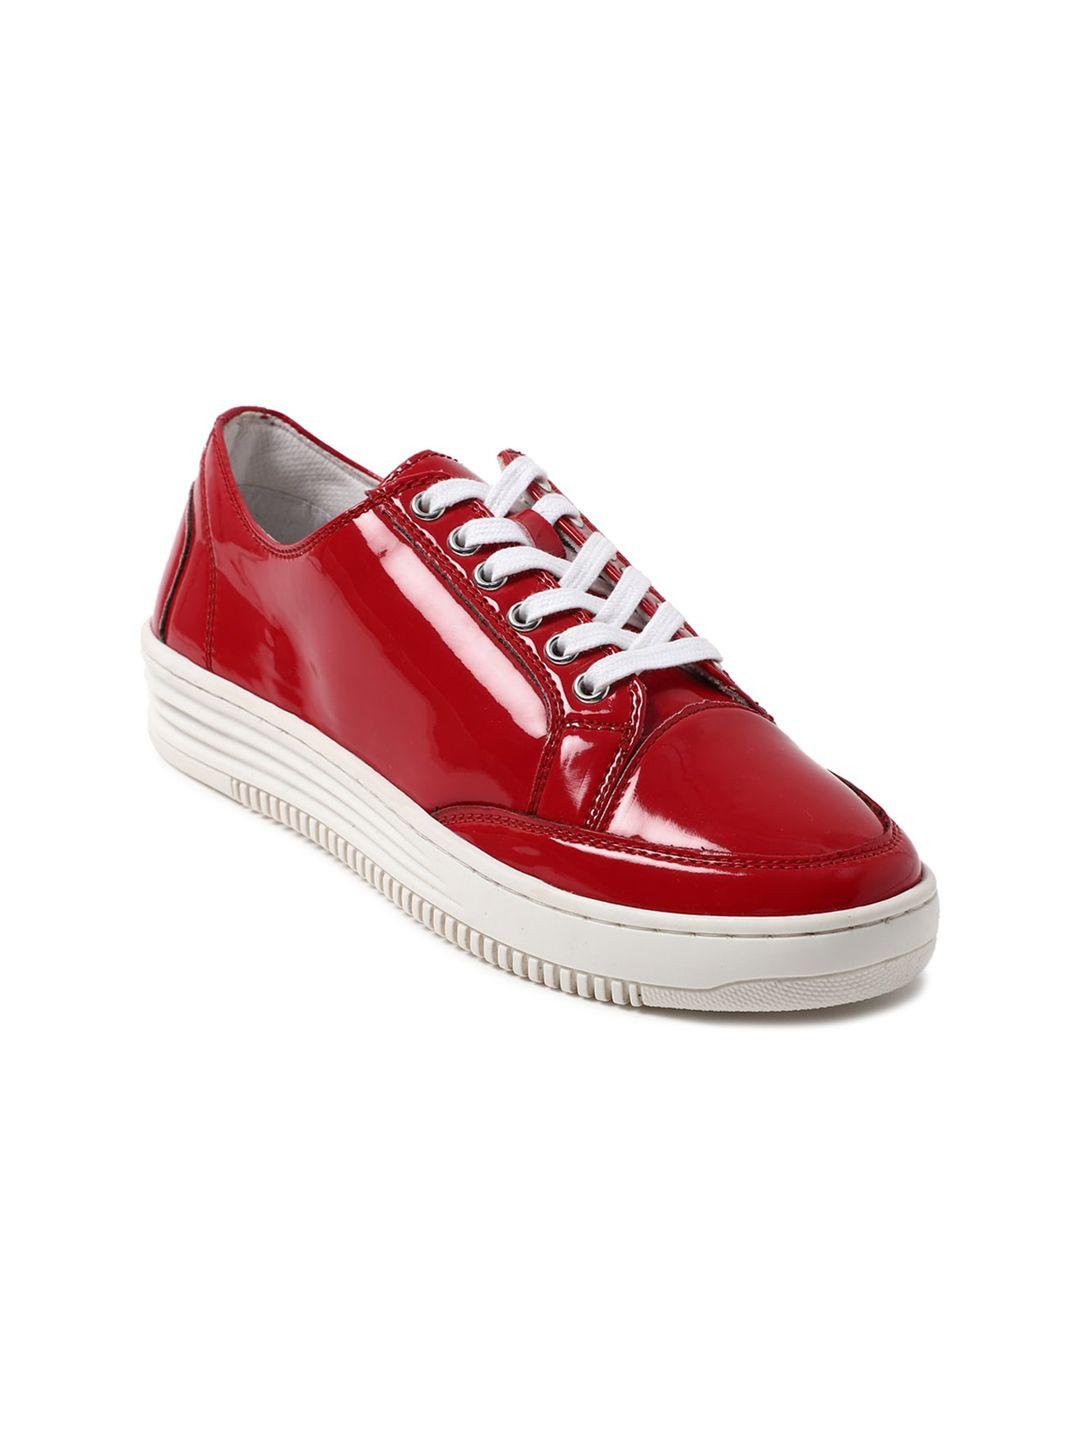 forever 21 women red textured pu sneakers